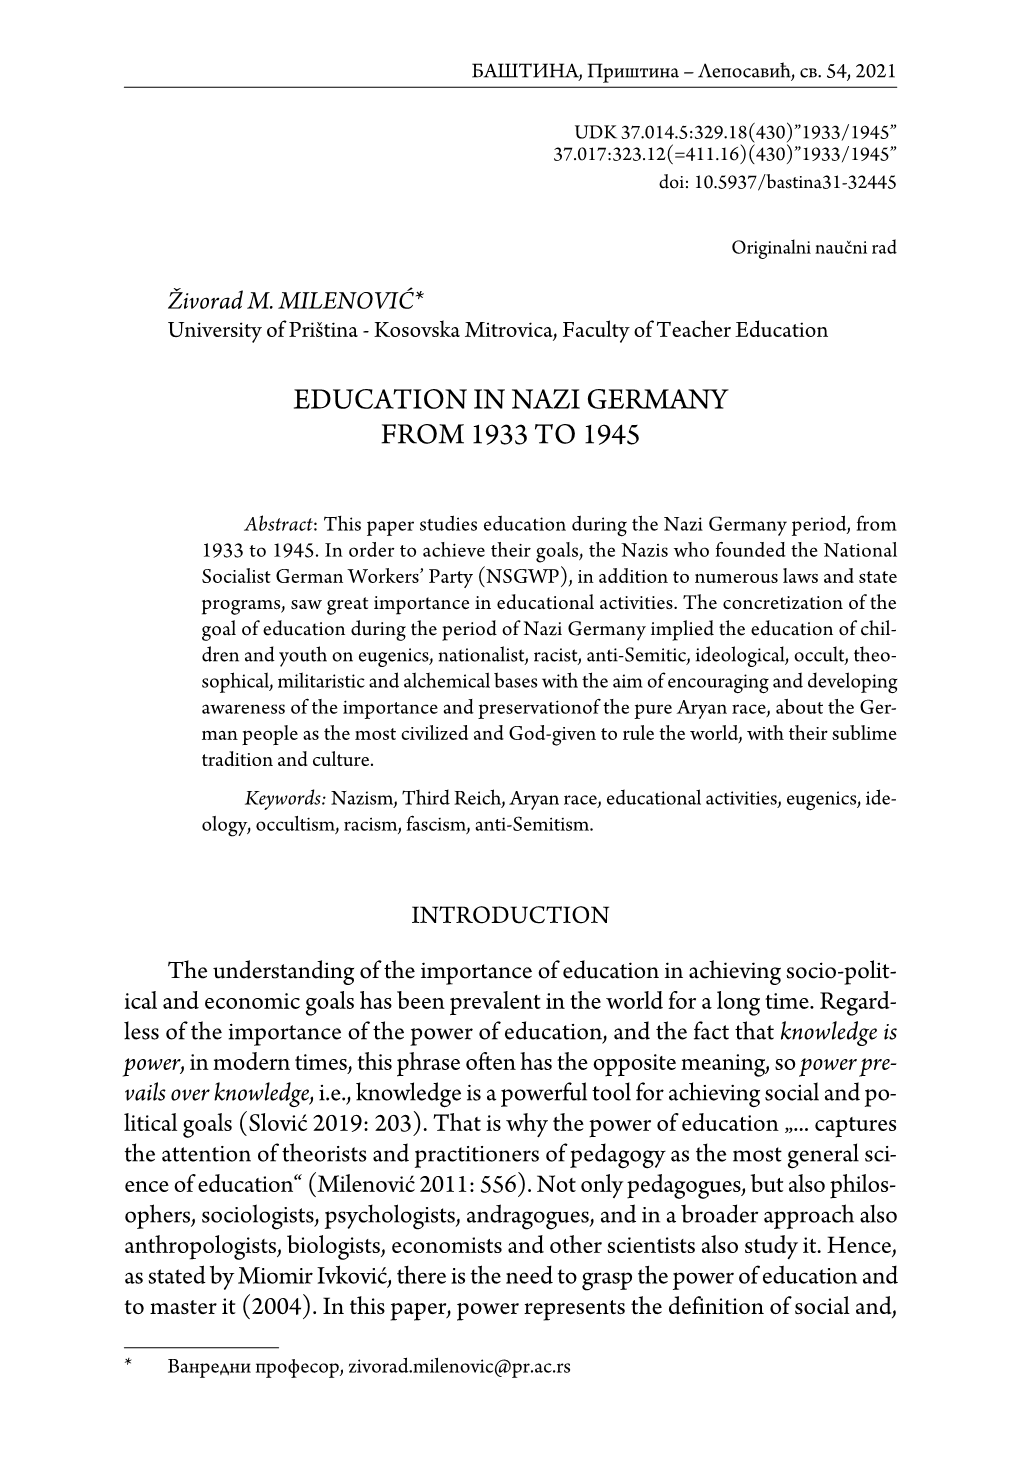 Education in Nazi Germany from 1933 to 1945